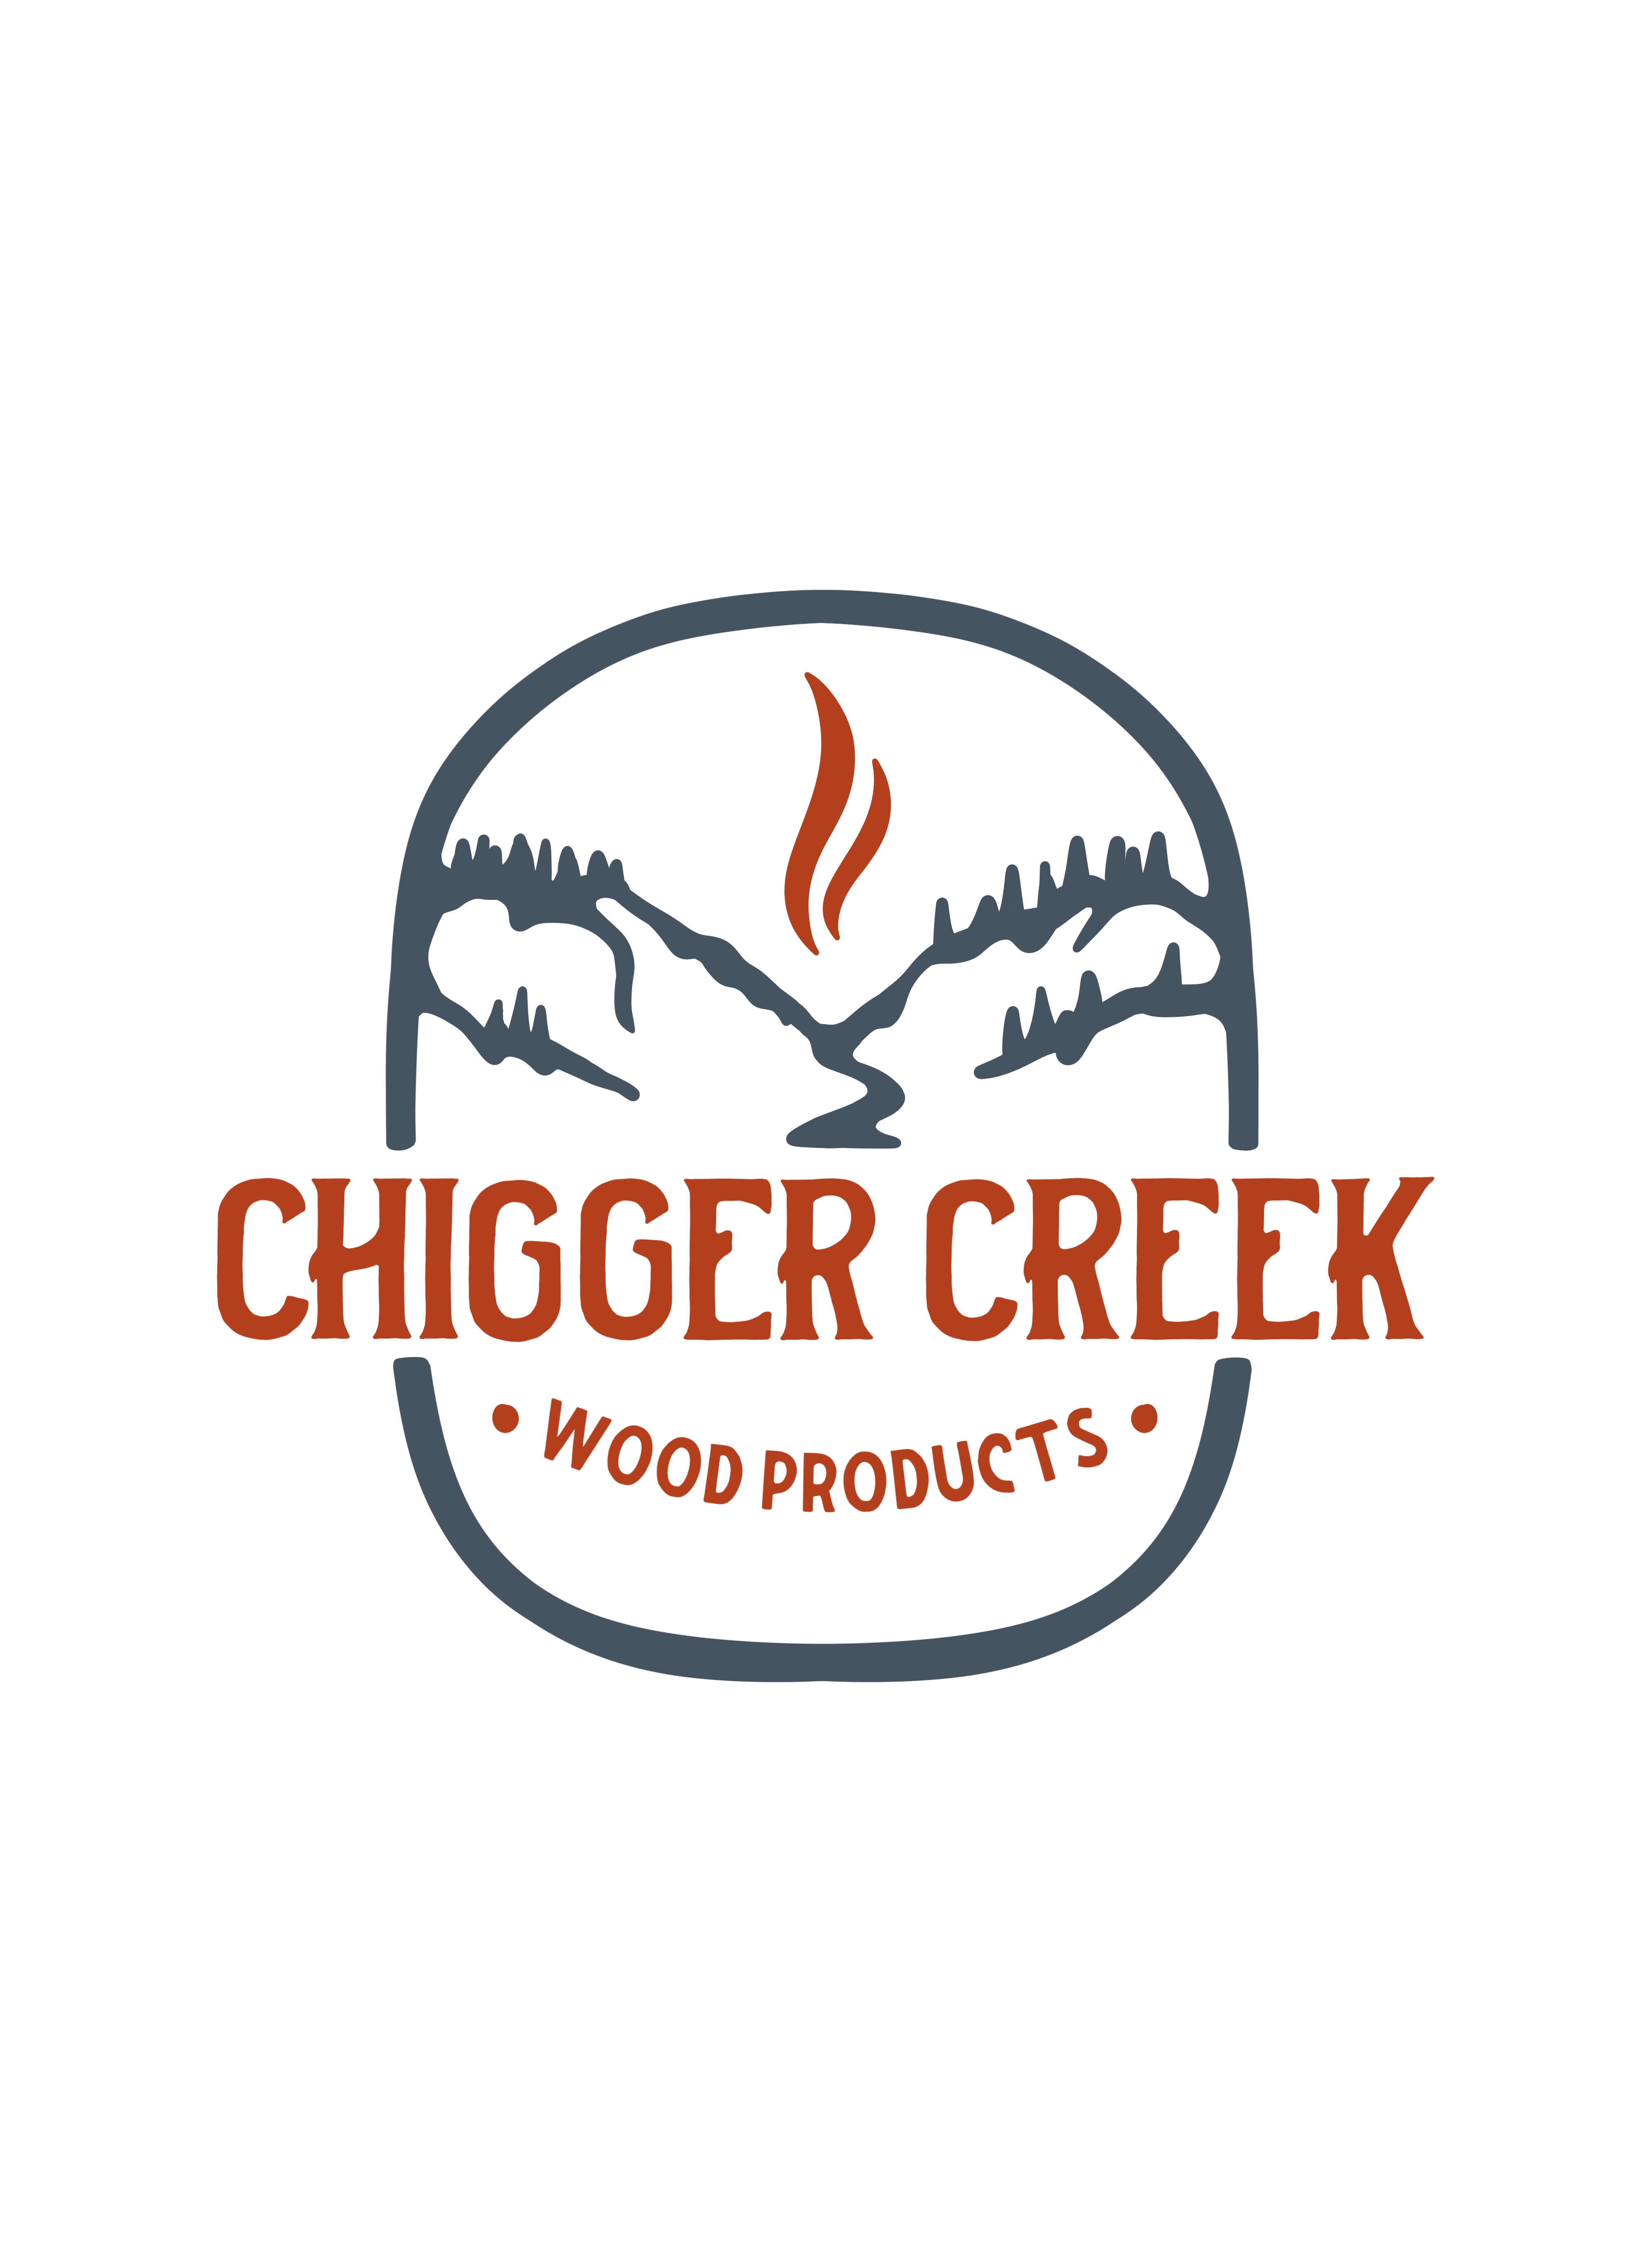 Sweet 'N Smoky Wild Cherry Chips - Chigger Creek Wood Products